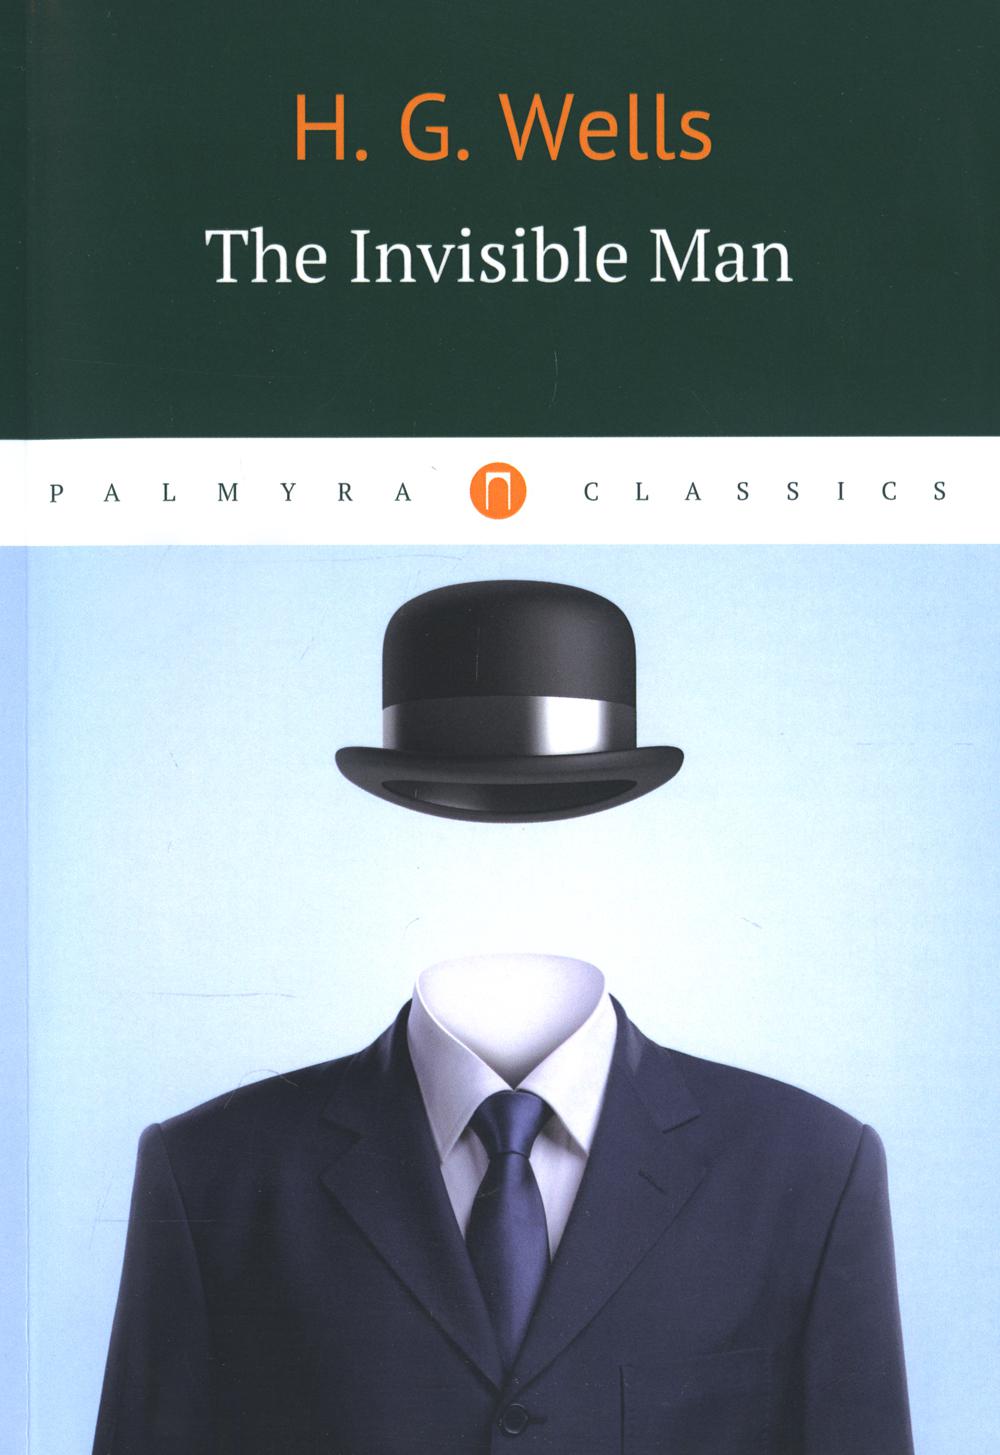 The invisible man = -:   .